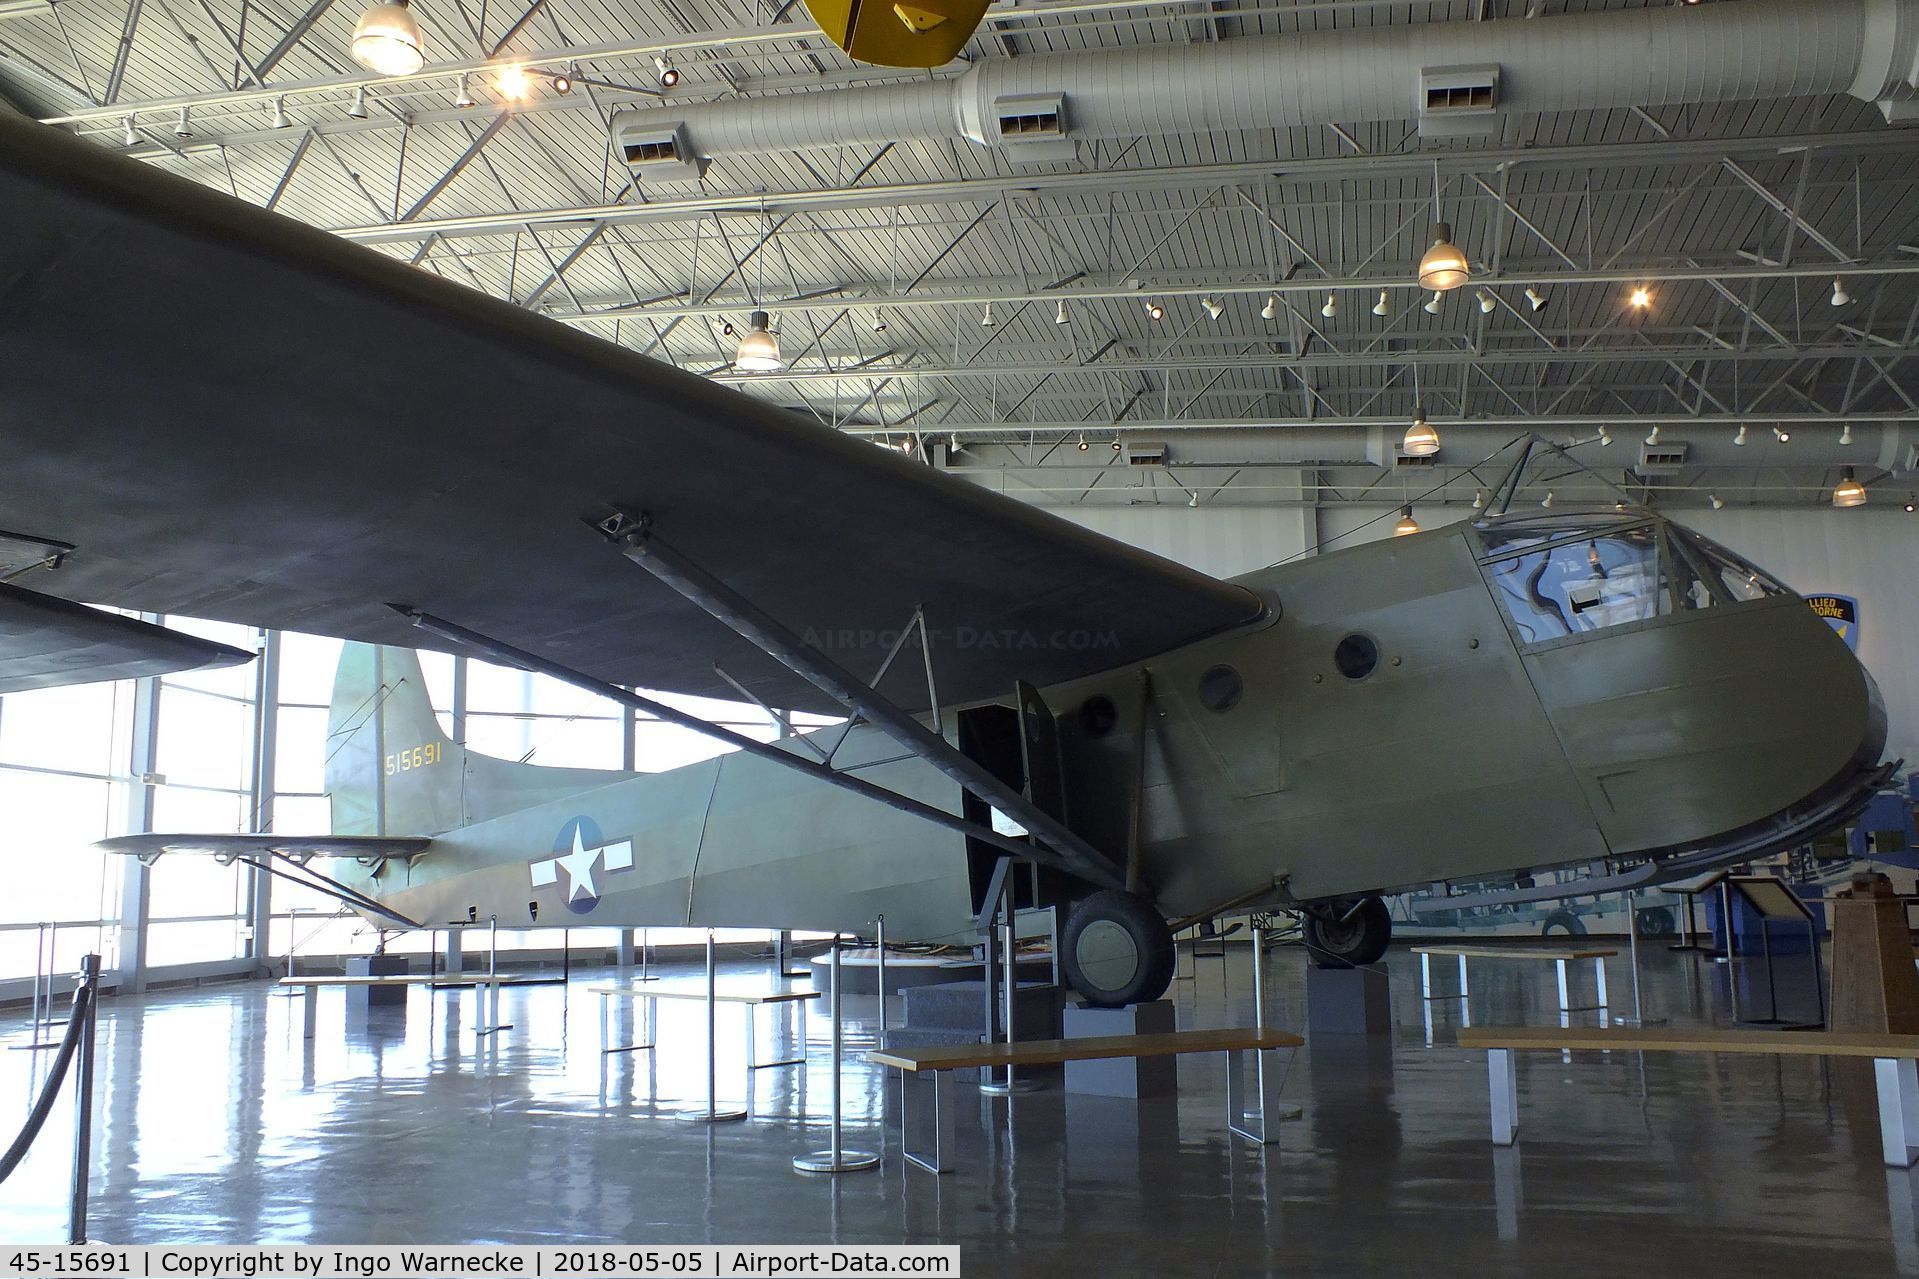 45-15691, 1945 Waco CG-4A C/N Not found, Waco CG-4A Hadrian at the Silent Wings Museum, Lubbock TX